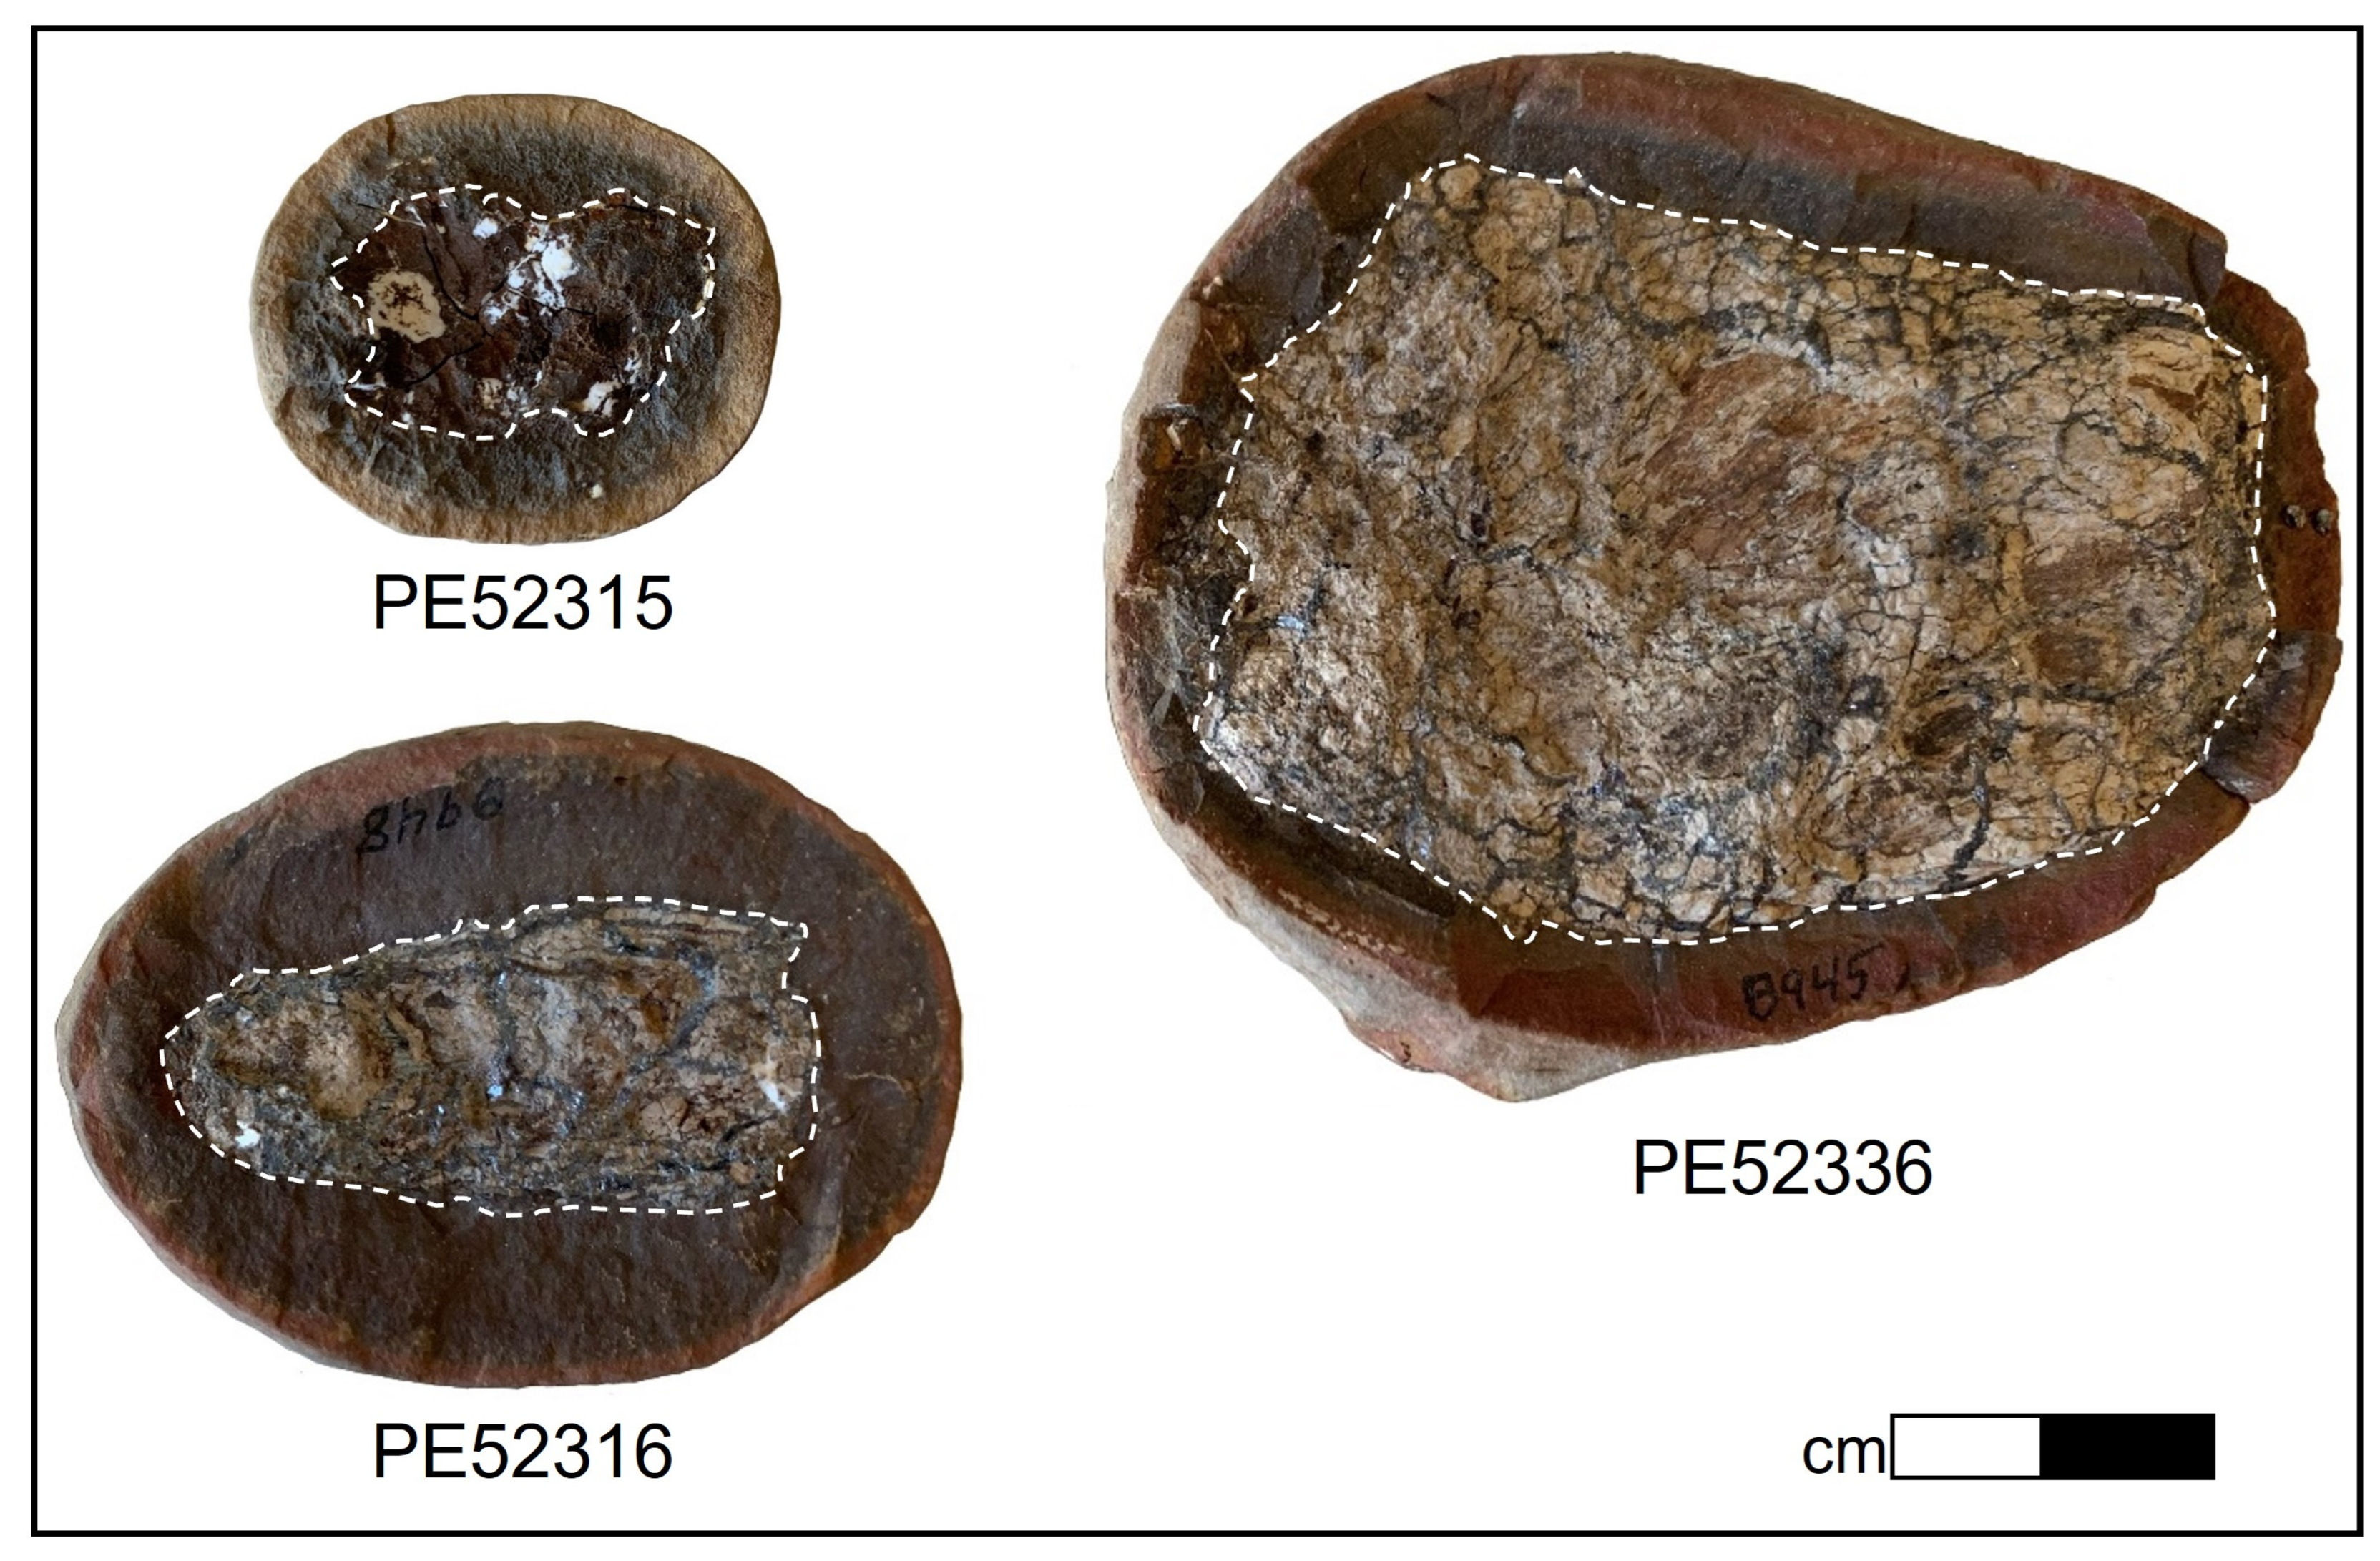 Biology | Free Full-Text | Fossil Biomarkers and Biosignatures Preserved in  Coprolites Reveal Carnivorous Diets in the Carboniferous Mazon Creek  Ecosystem